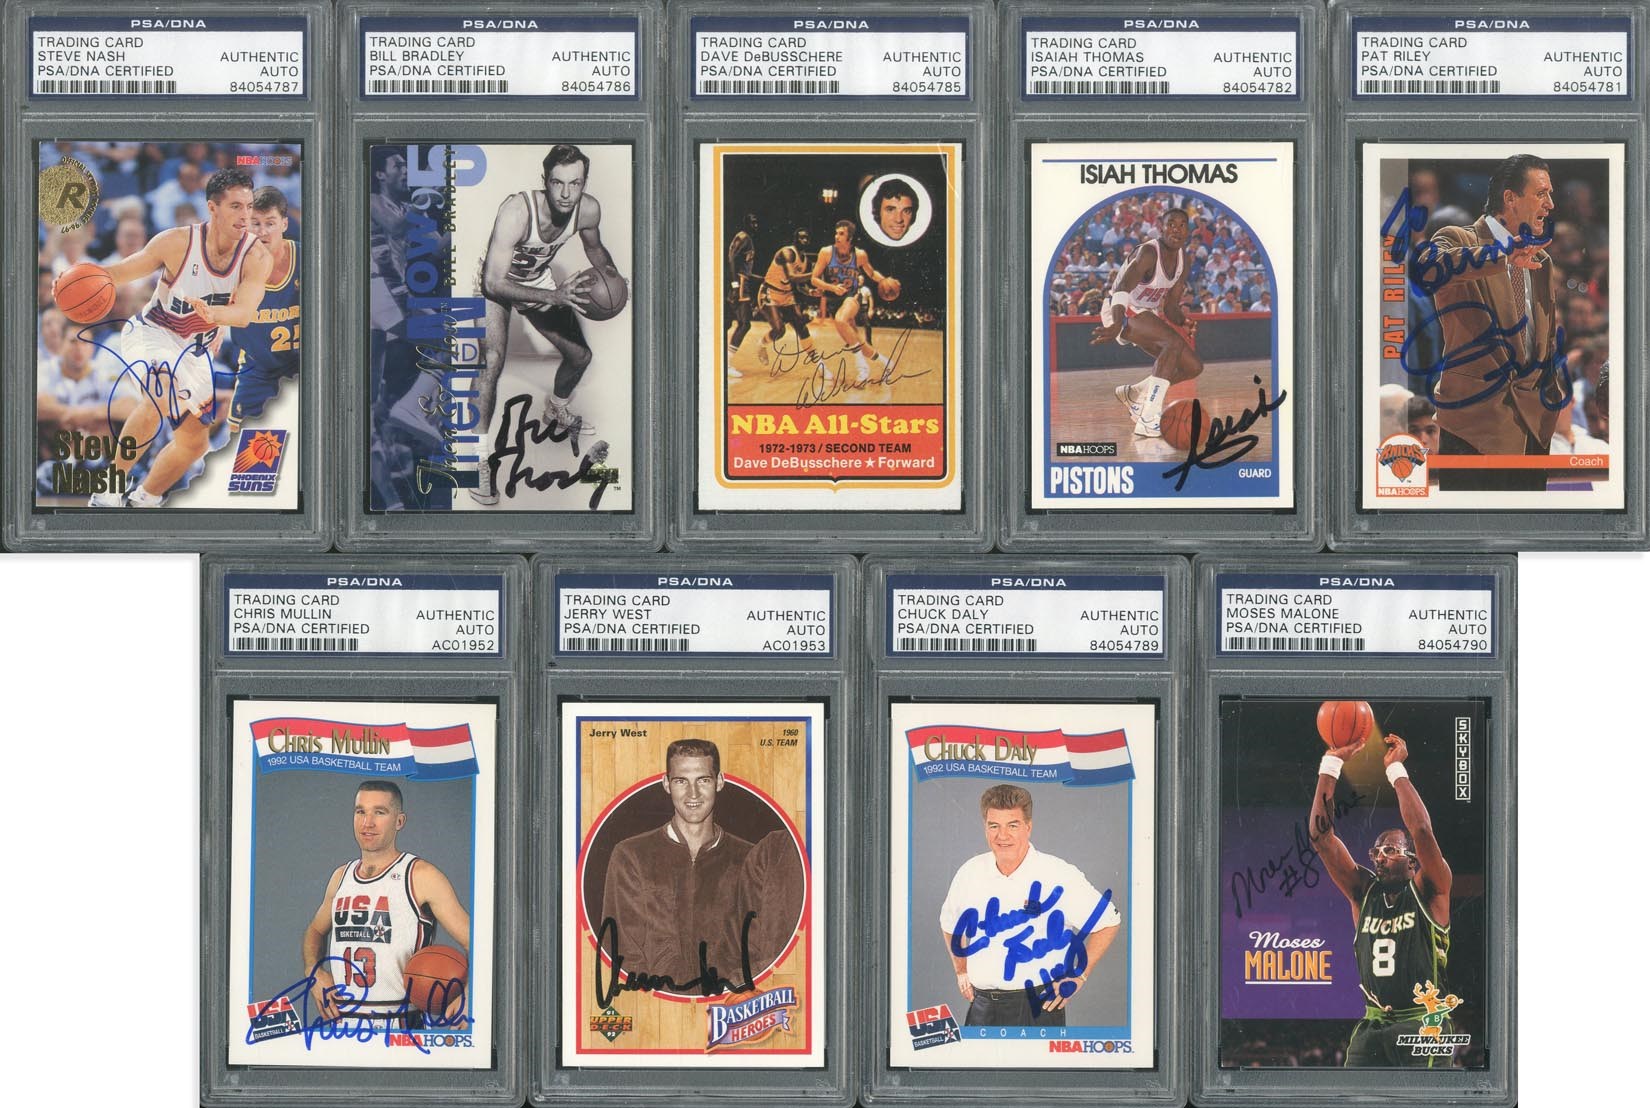 Basketball Cards - 1980s-90s NBA Signed Trading Card Collection with Hall of Famers (365+)